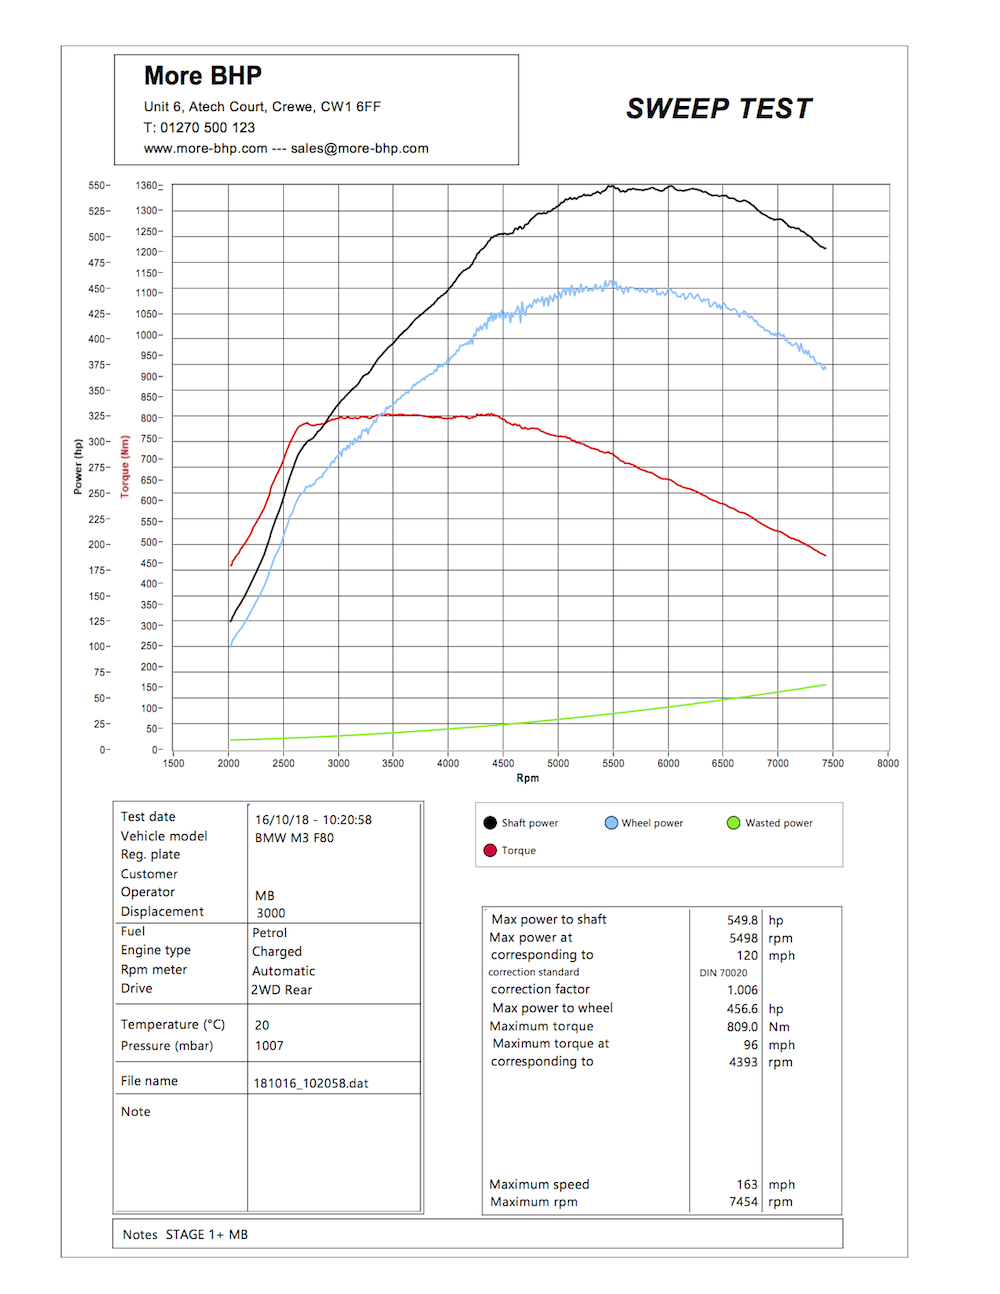 Rolling road dyno printout for the MoreBHP development F80 M3 with a Stage 1 Remap with octane booster